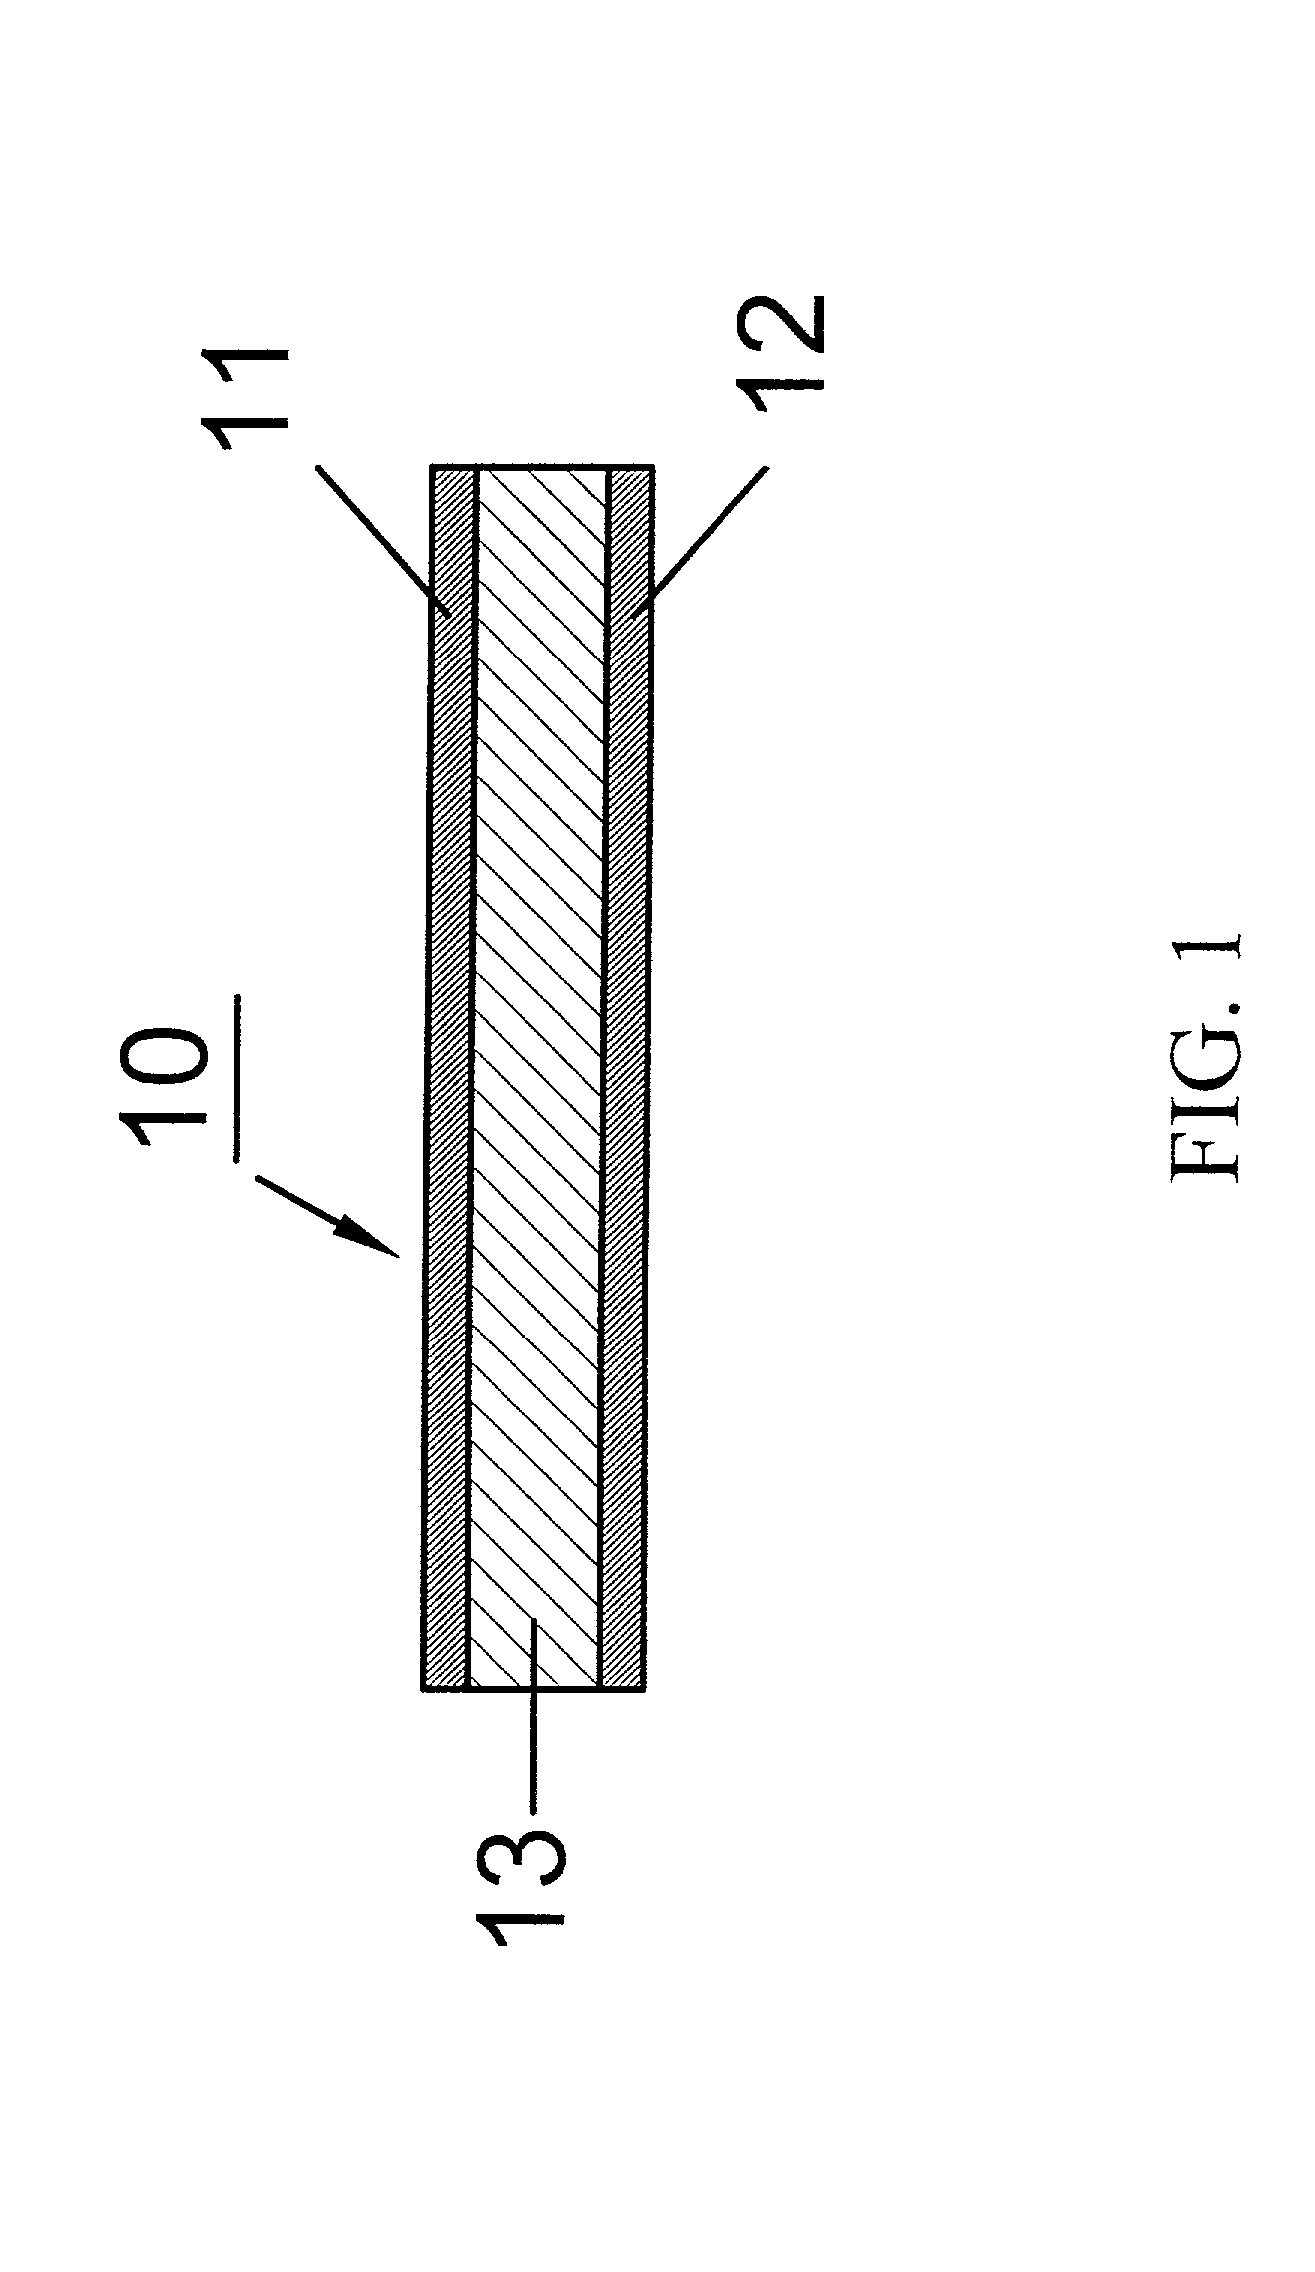 Structure for composite materials of positive temperature coefficient thermistor devices and method of making the same